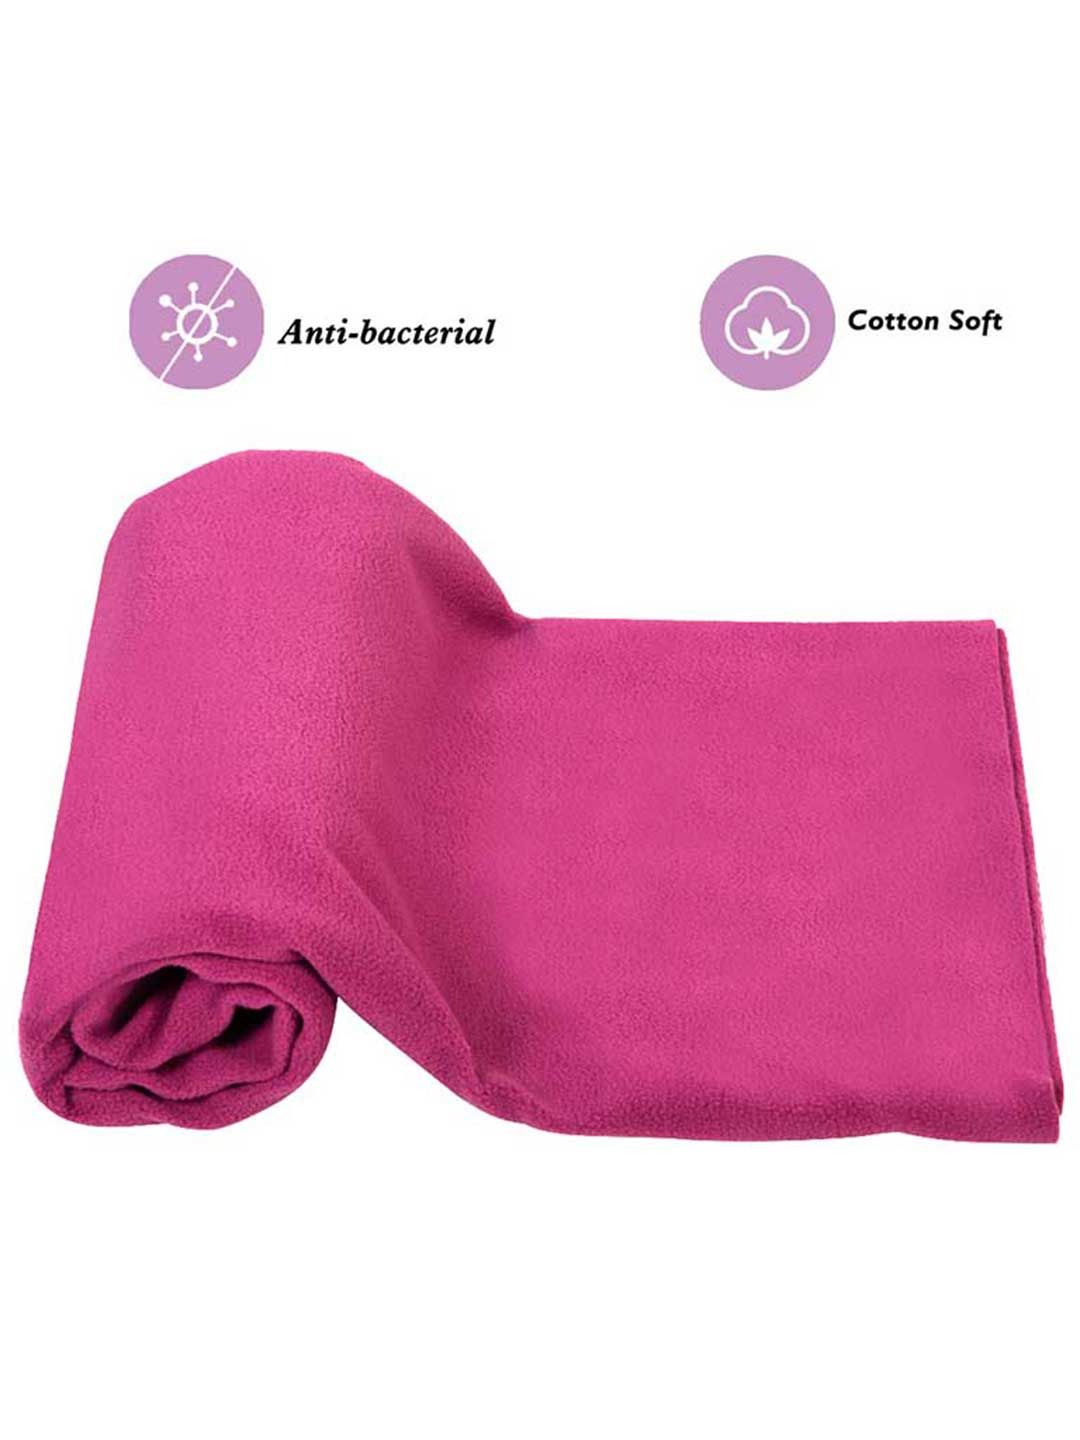 Mee Mee'S Baby Total Dry & Breathable Mattress Protector Mat - Rani Pink (L)